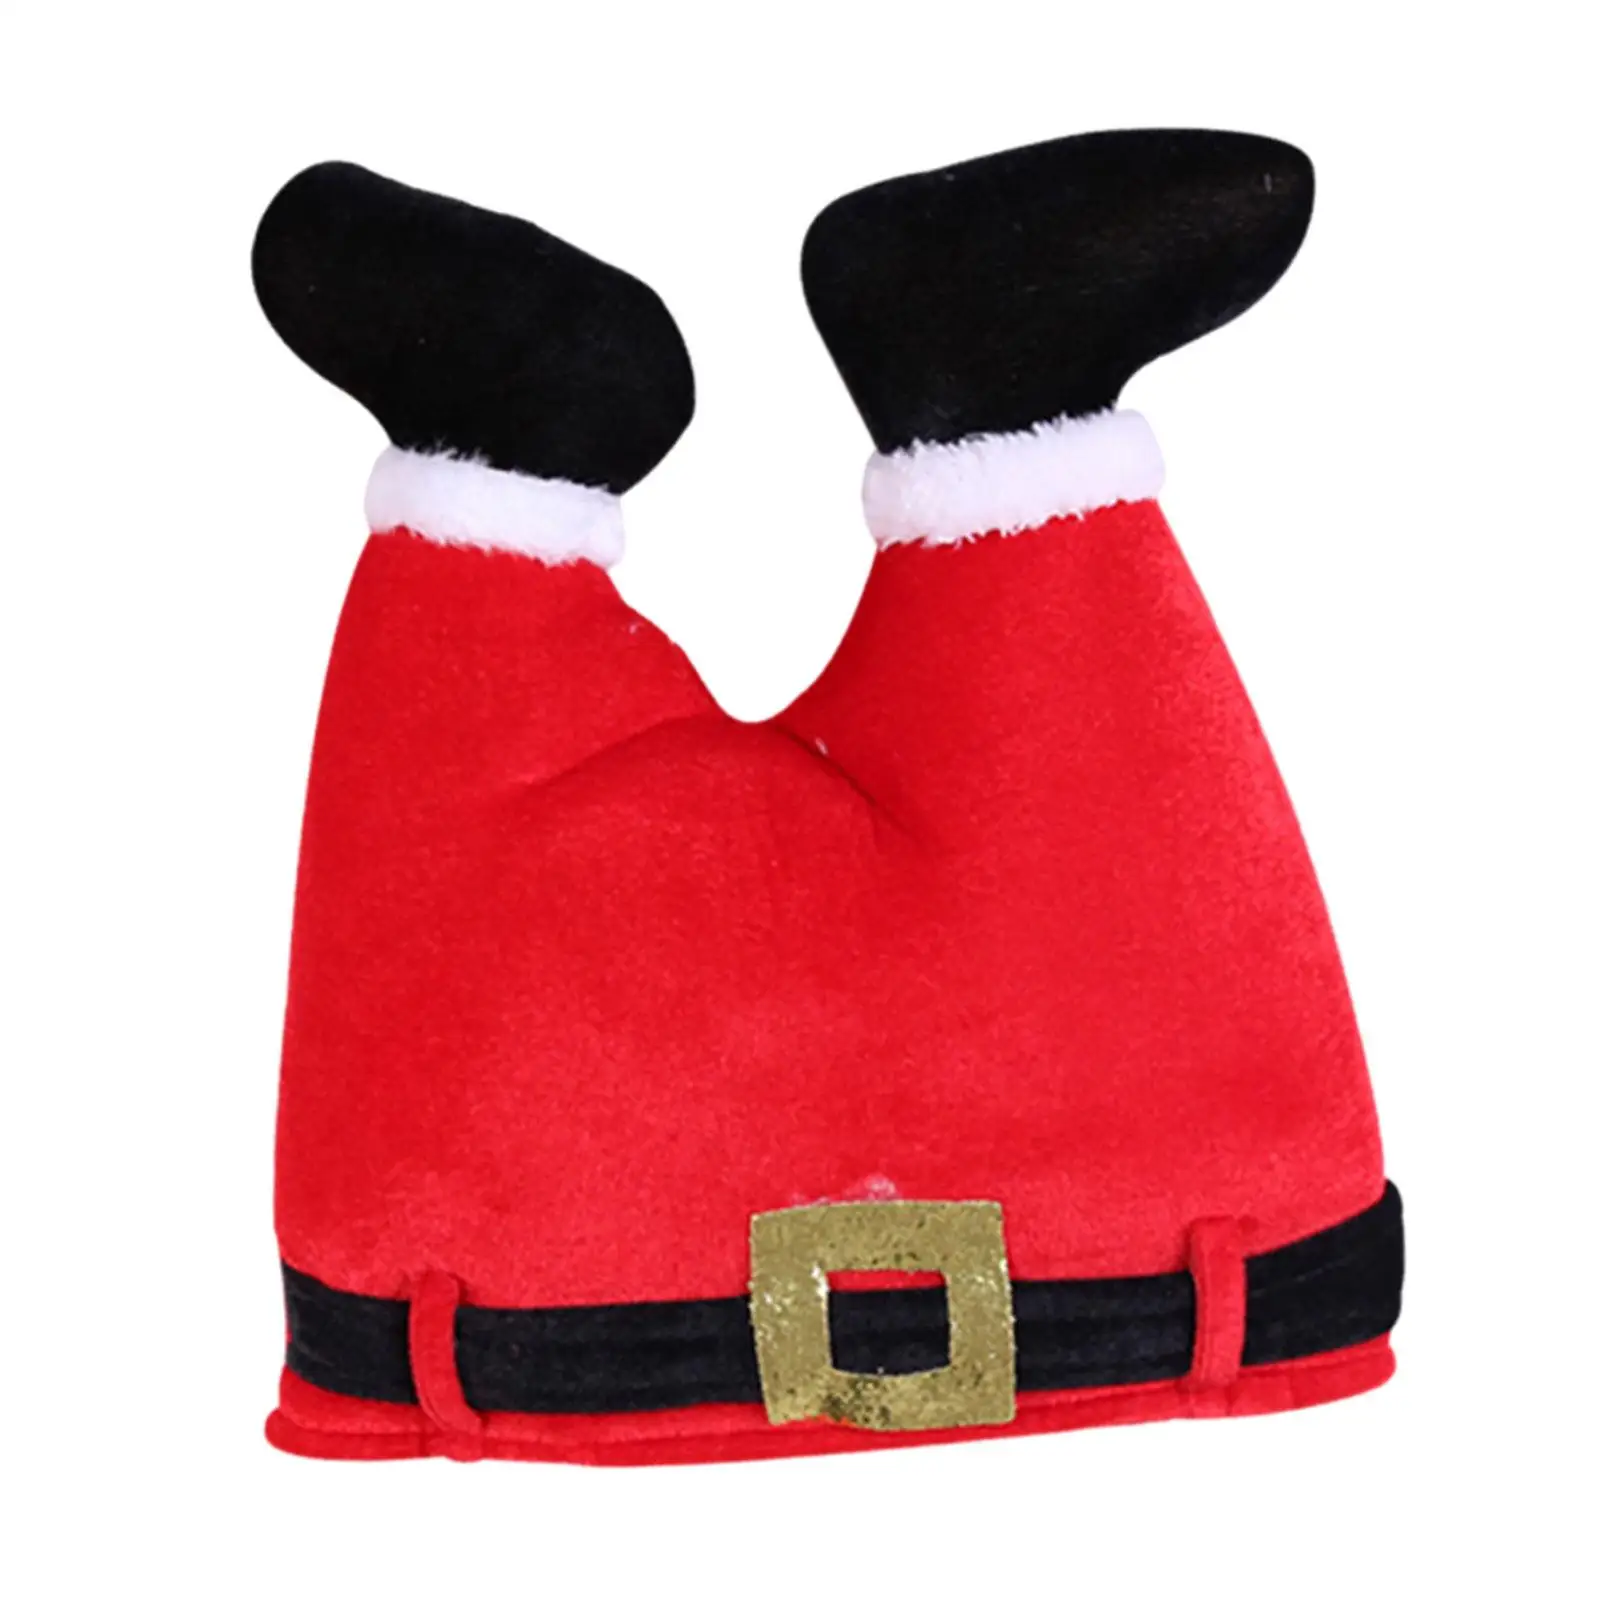 Chrismas Hat Comfortable Novelty Adult Kids Photography Prop Xmas Hat for Party Festival Cosplay Costume Celebrations Christmas